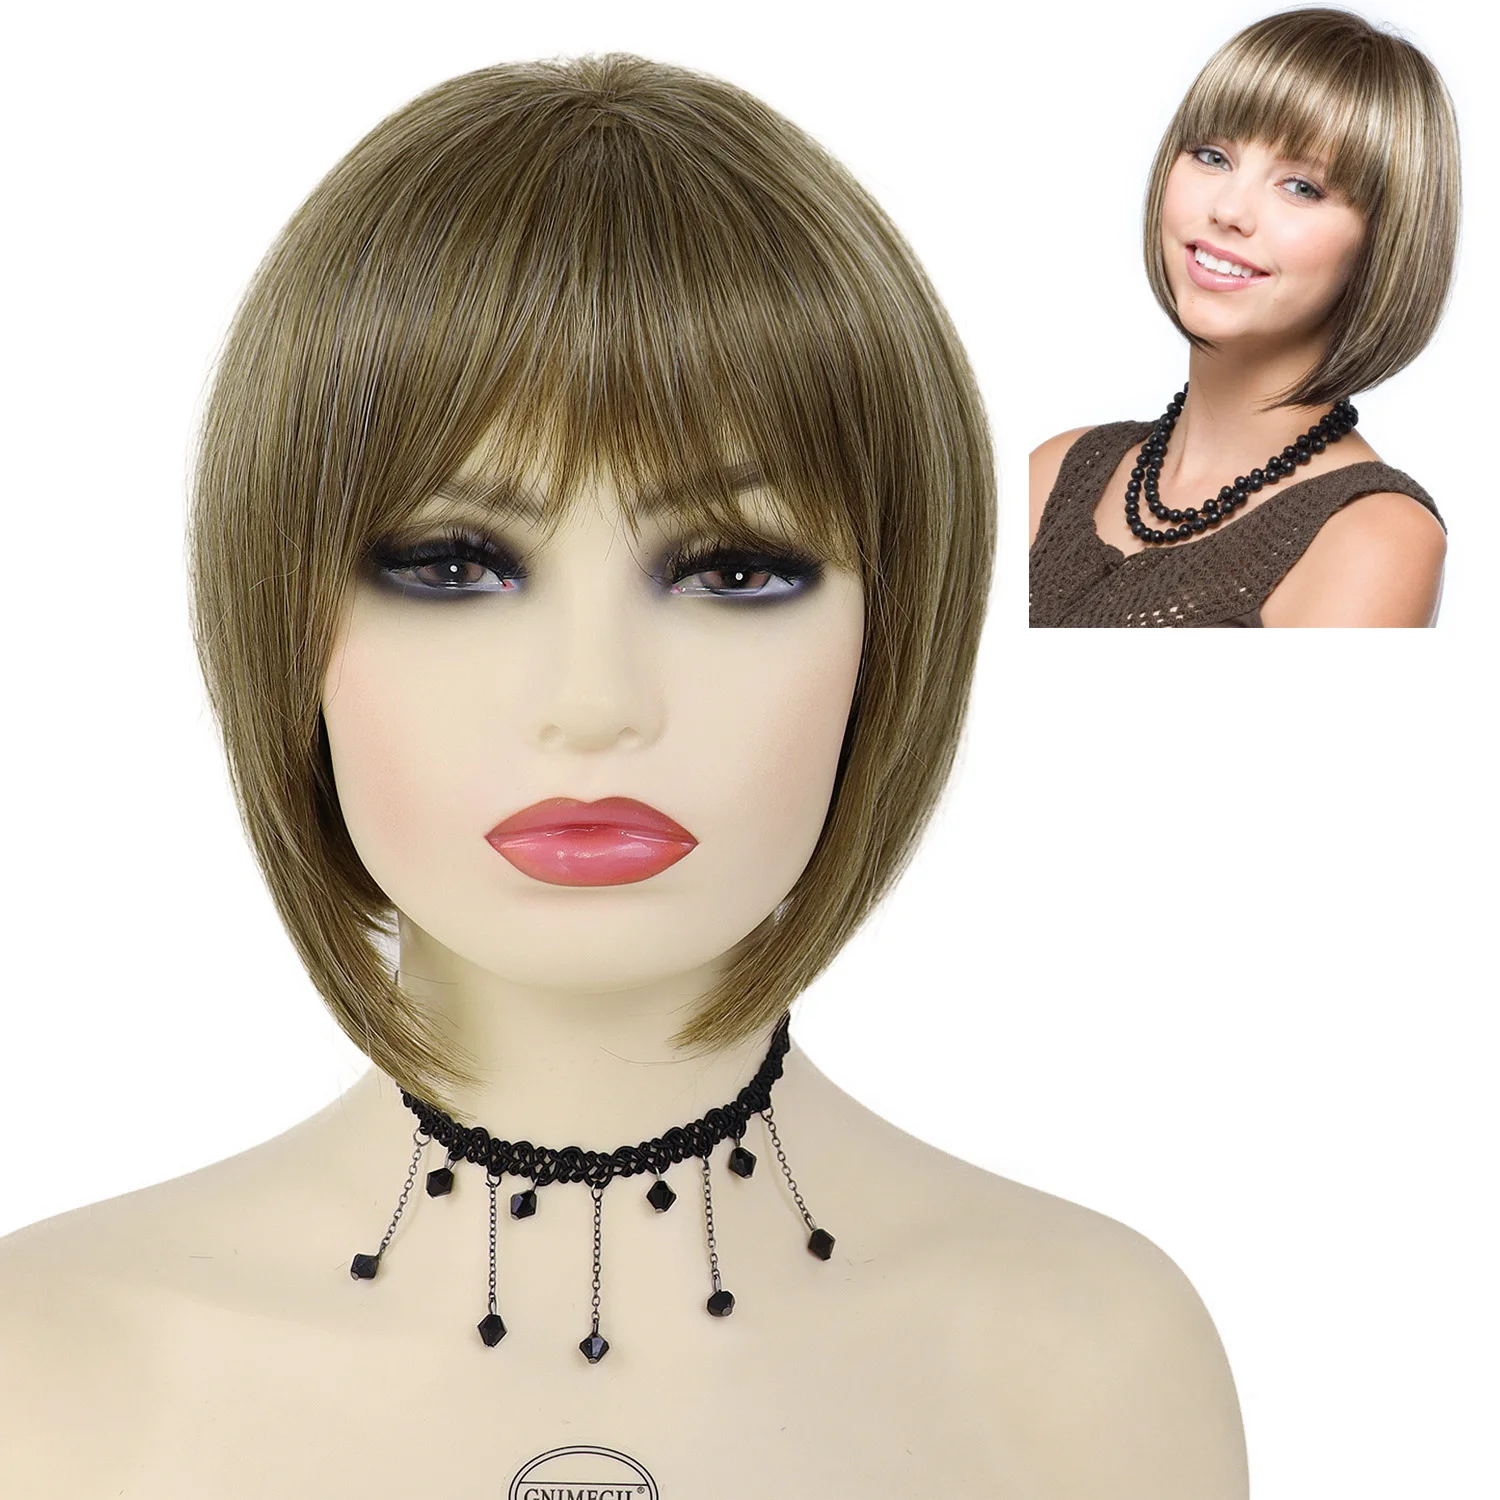 

GNIMEGIL Brown Wig with Bangs Synthetic Hair Short Bob Wig for White Women Mix Brown Heat Resistant Straight Haircut Natural Wig